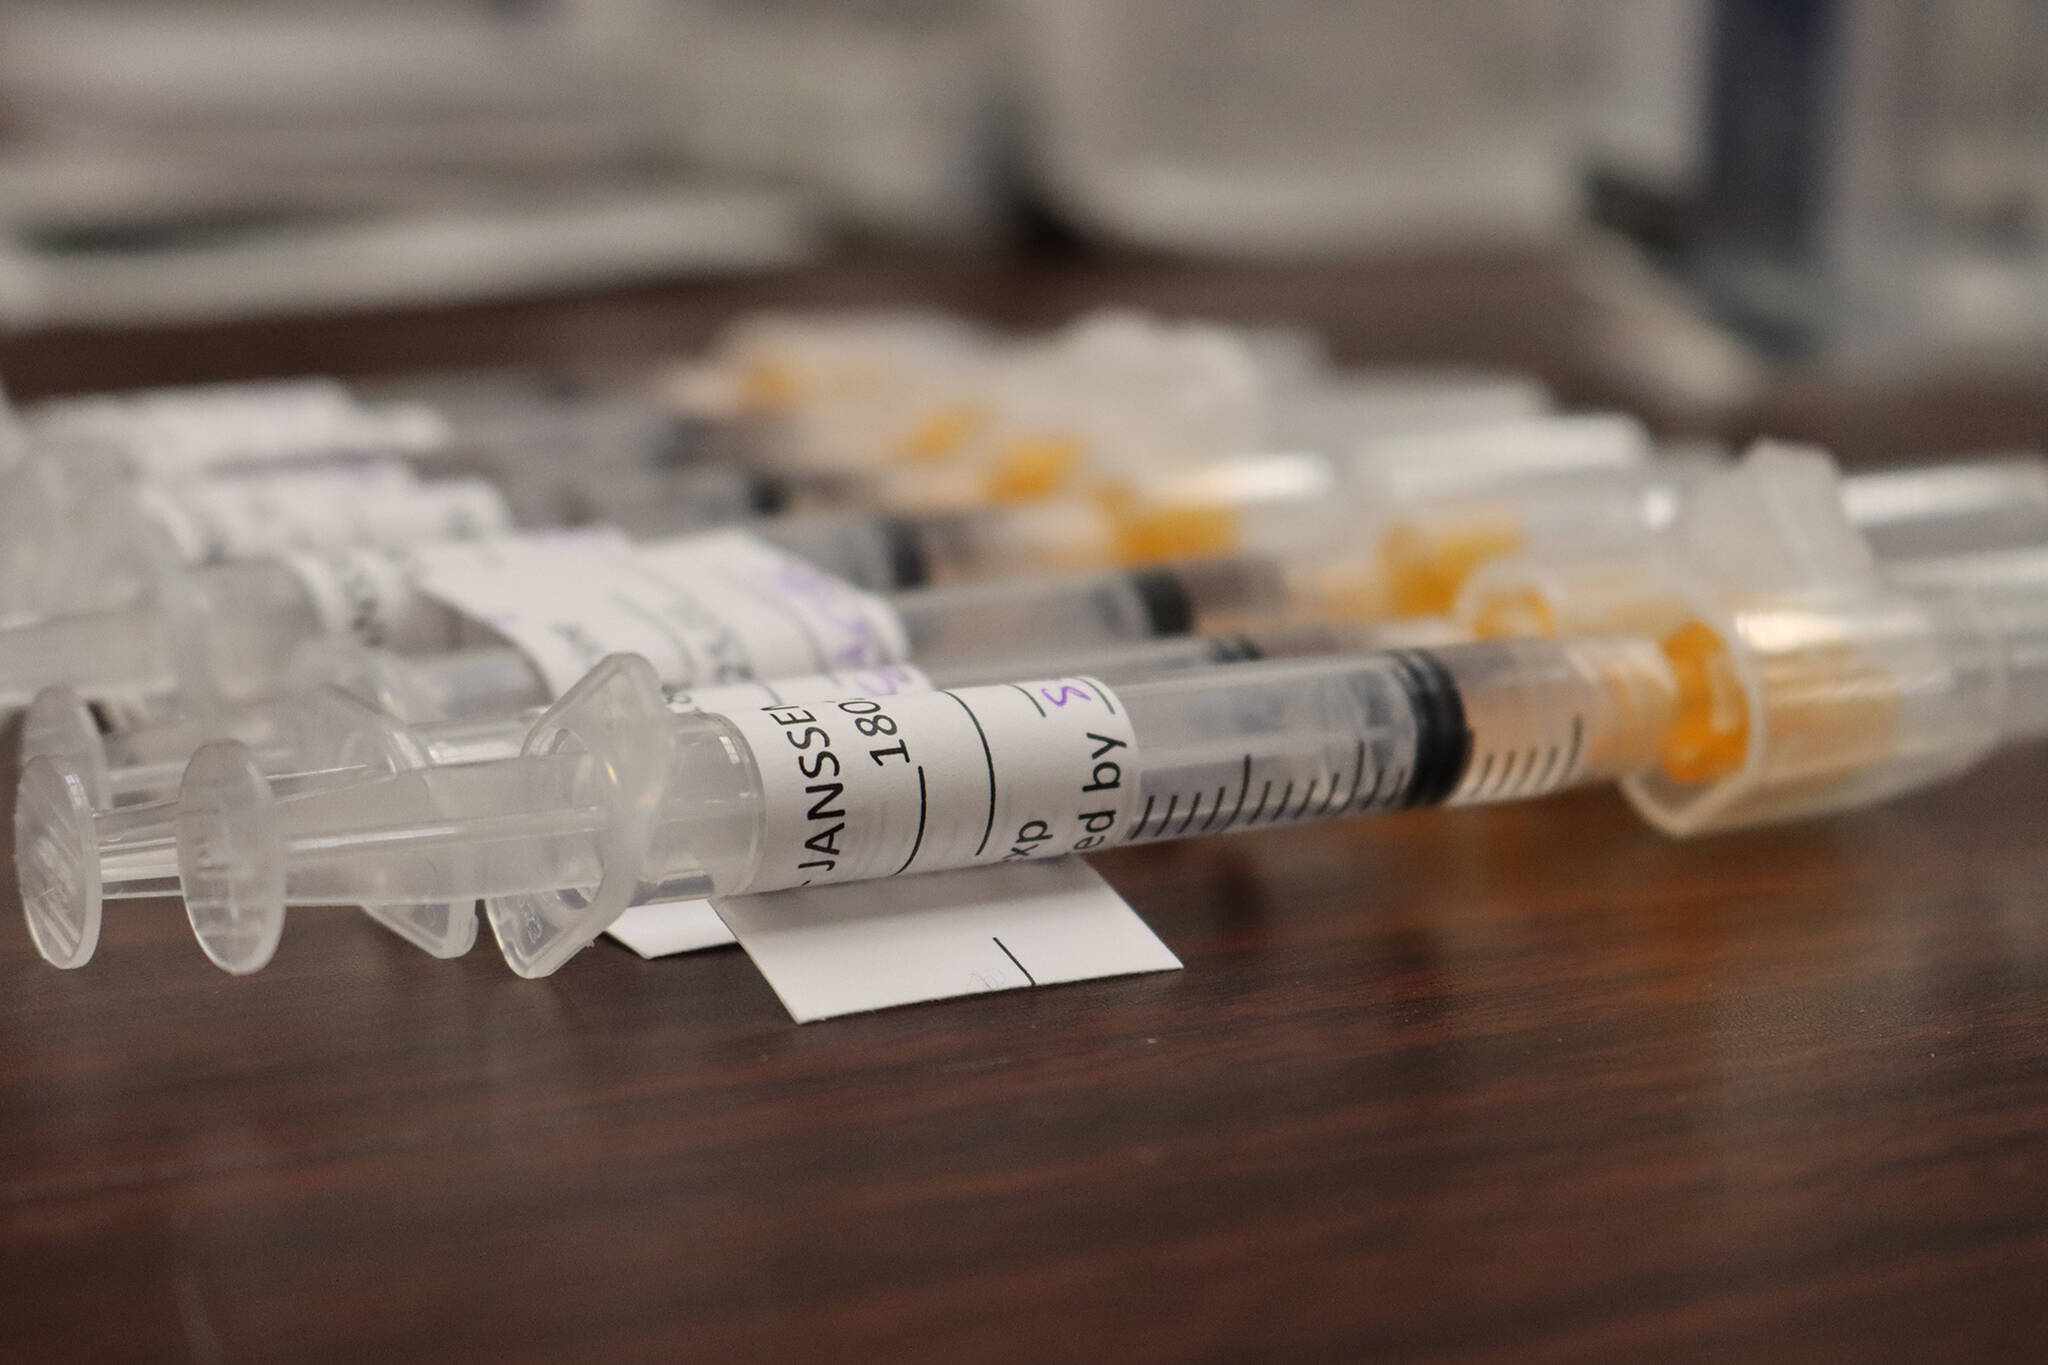 The Biden administration previously announced it would require employees of certain contractors and large employers to be vaccinated against COVID-19. On Friday, Gov. Mike Dunleavy and Attorney General Treg Taylor announced the state is joining a lawsuit over the announced mandate. (Ben Hohenstatt / Juneau Empire file)